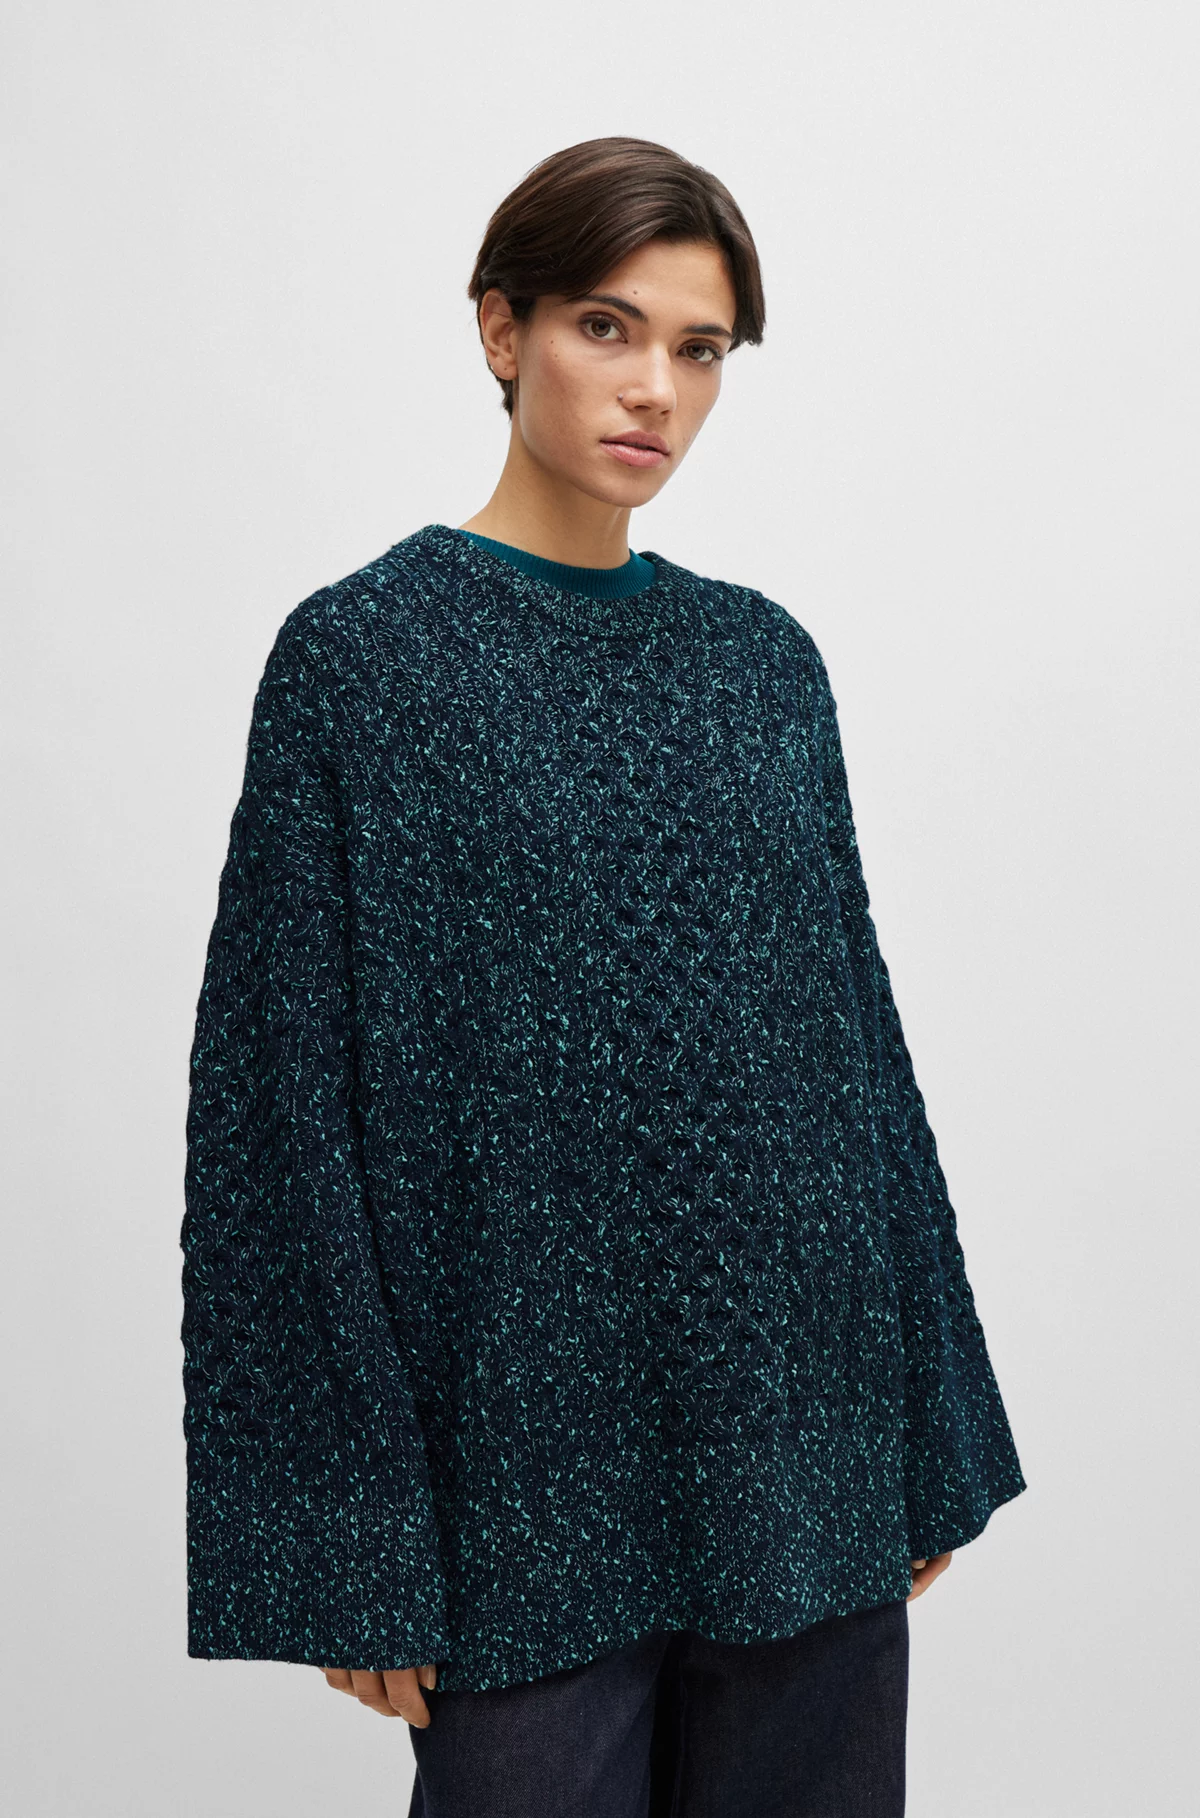 WOOL-BLEND SWEATER WITH CABLE-KNIT STRUCTURE